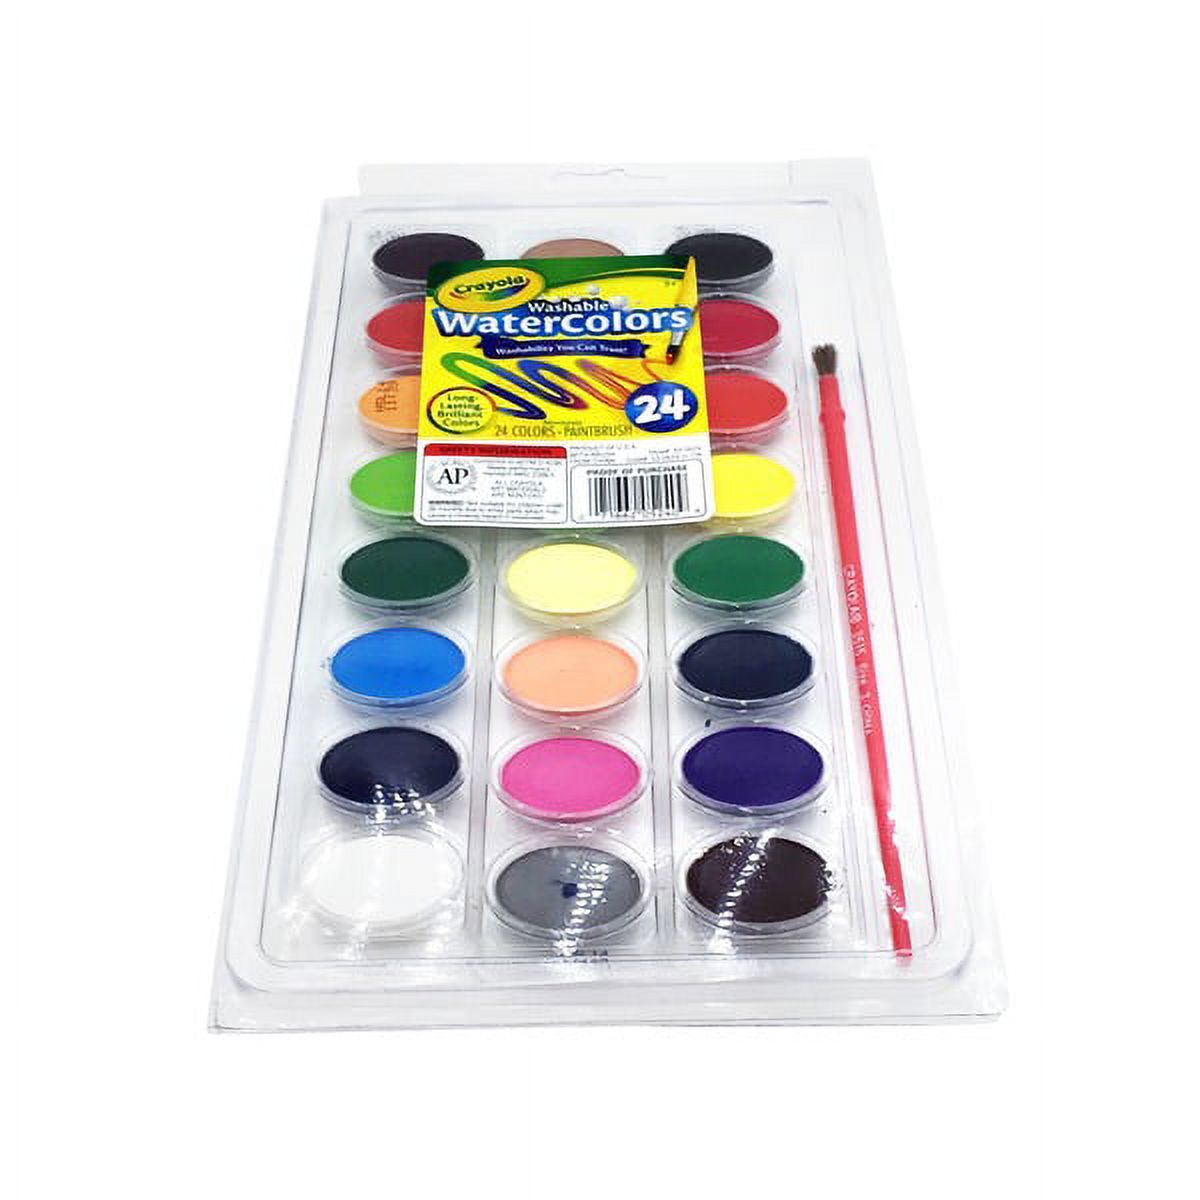 Crayola 24ct Watercolor Paints with Brush - image 2 of 8